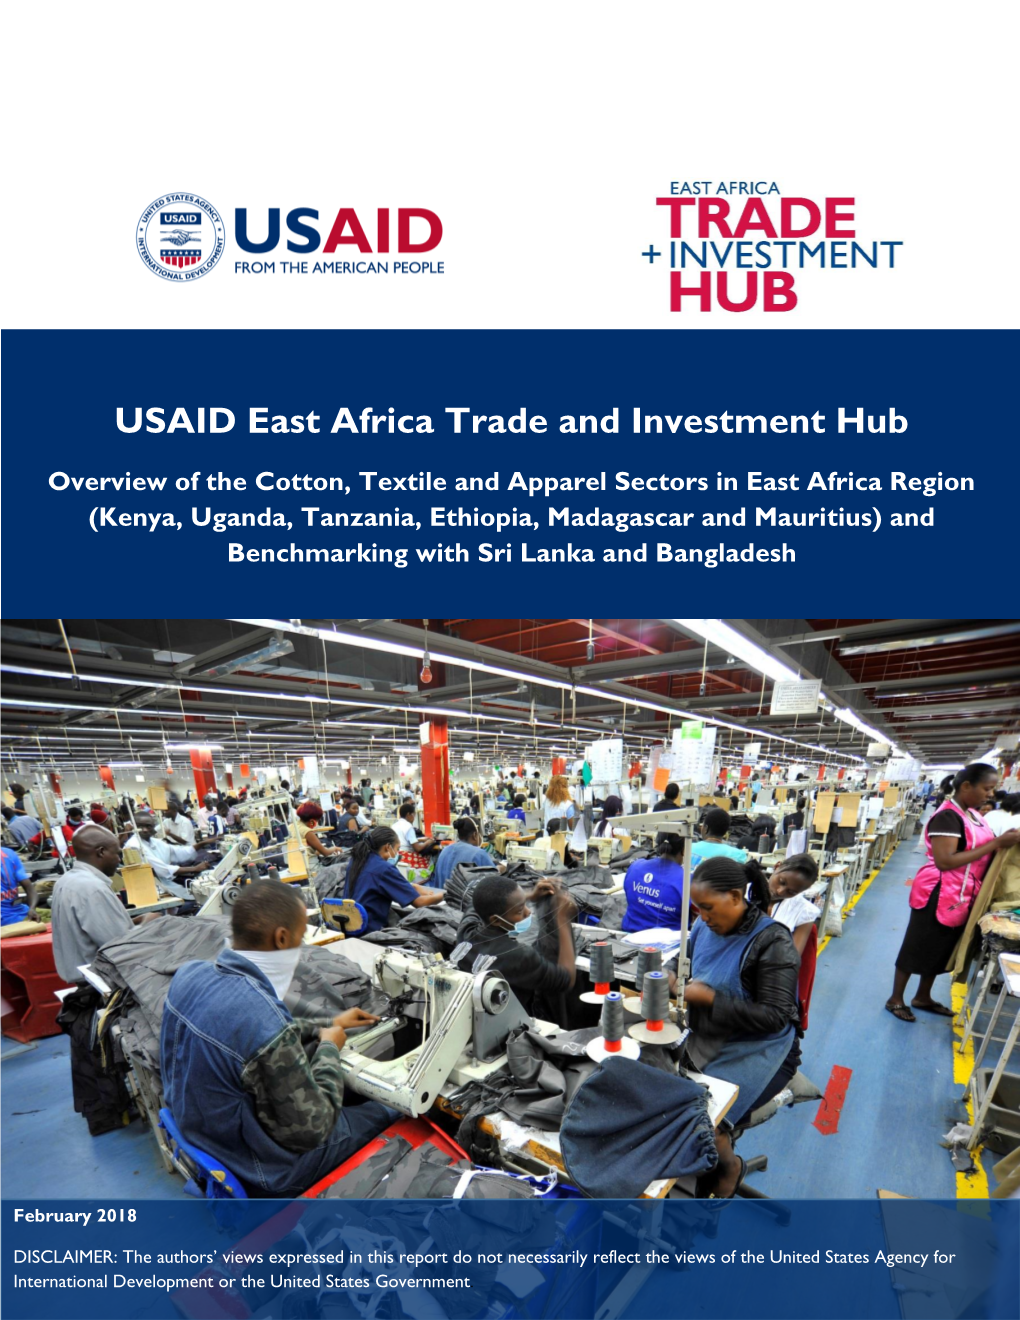 Overview of the Cotton, Textile and Apparel Sectors in East Africa